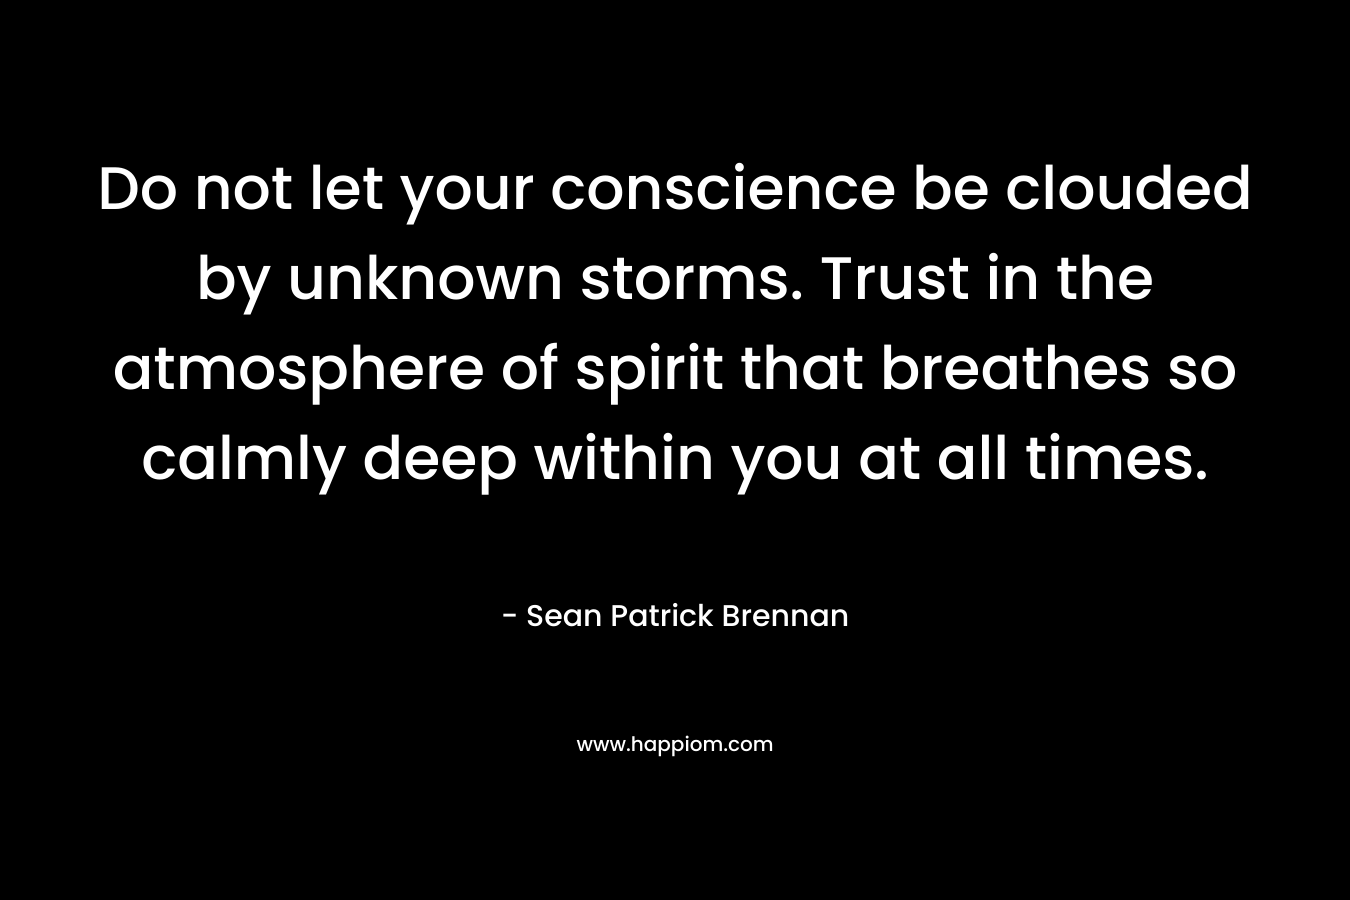 Do not let your conscience be clouded by unknown storms. Trust in the atmosphere of spirit that breathes so calmly deep within you at all times.